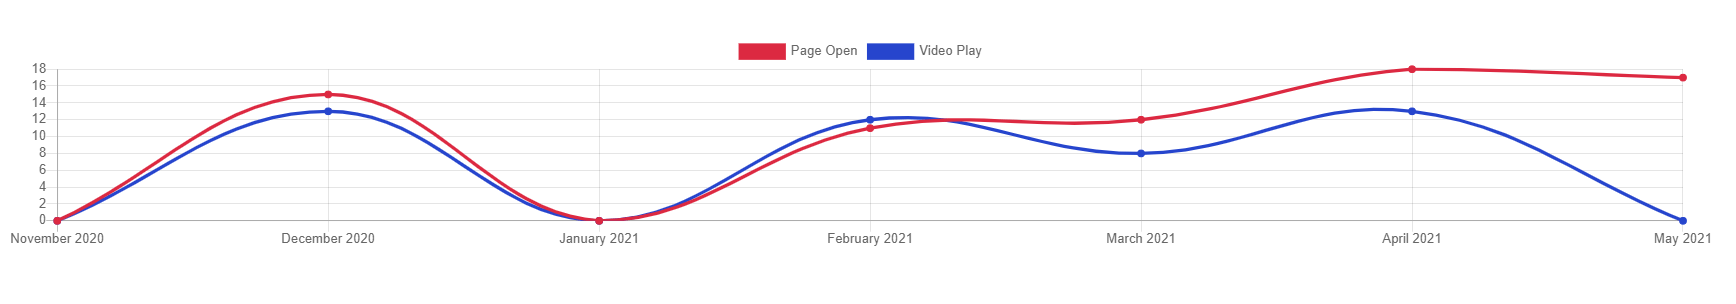 Video Reply Reports Chart Open Play